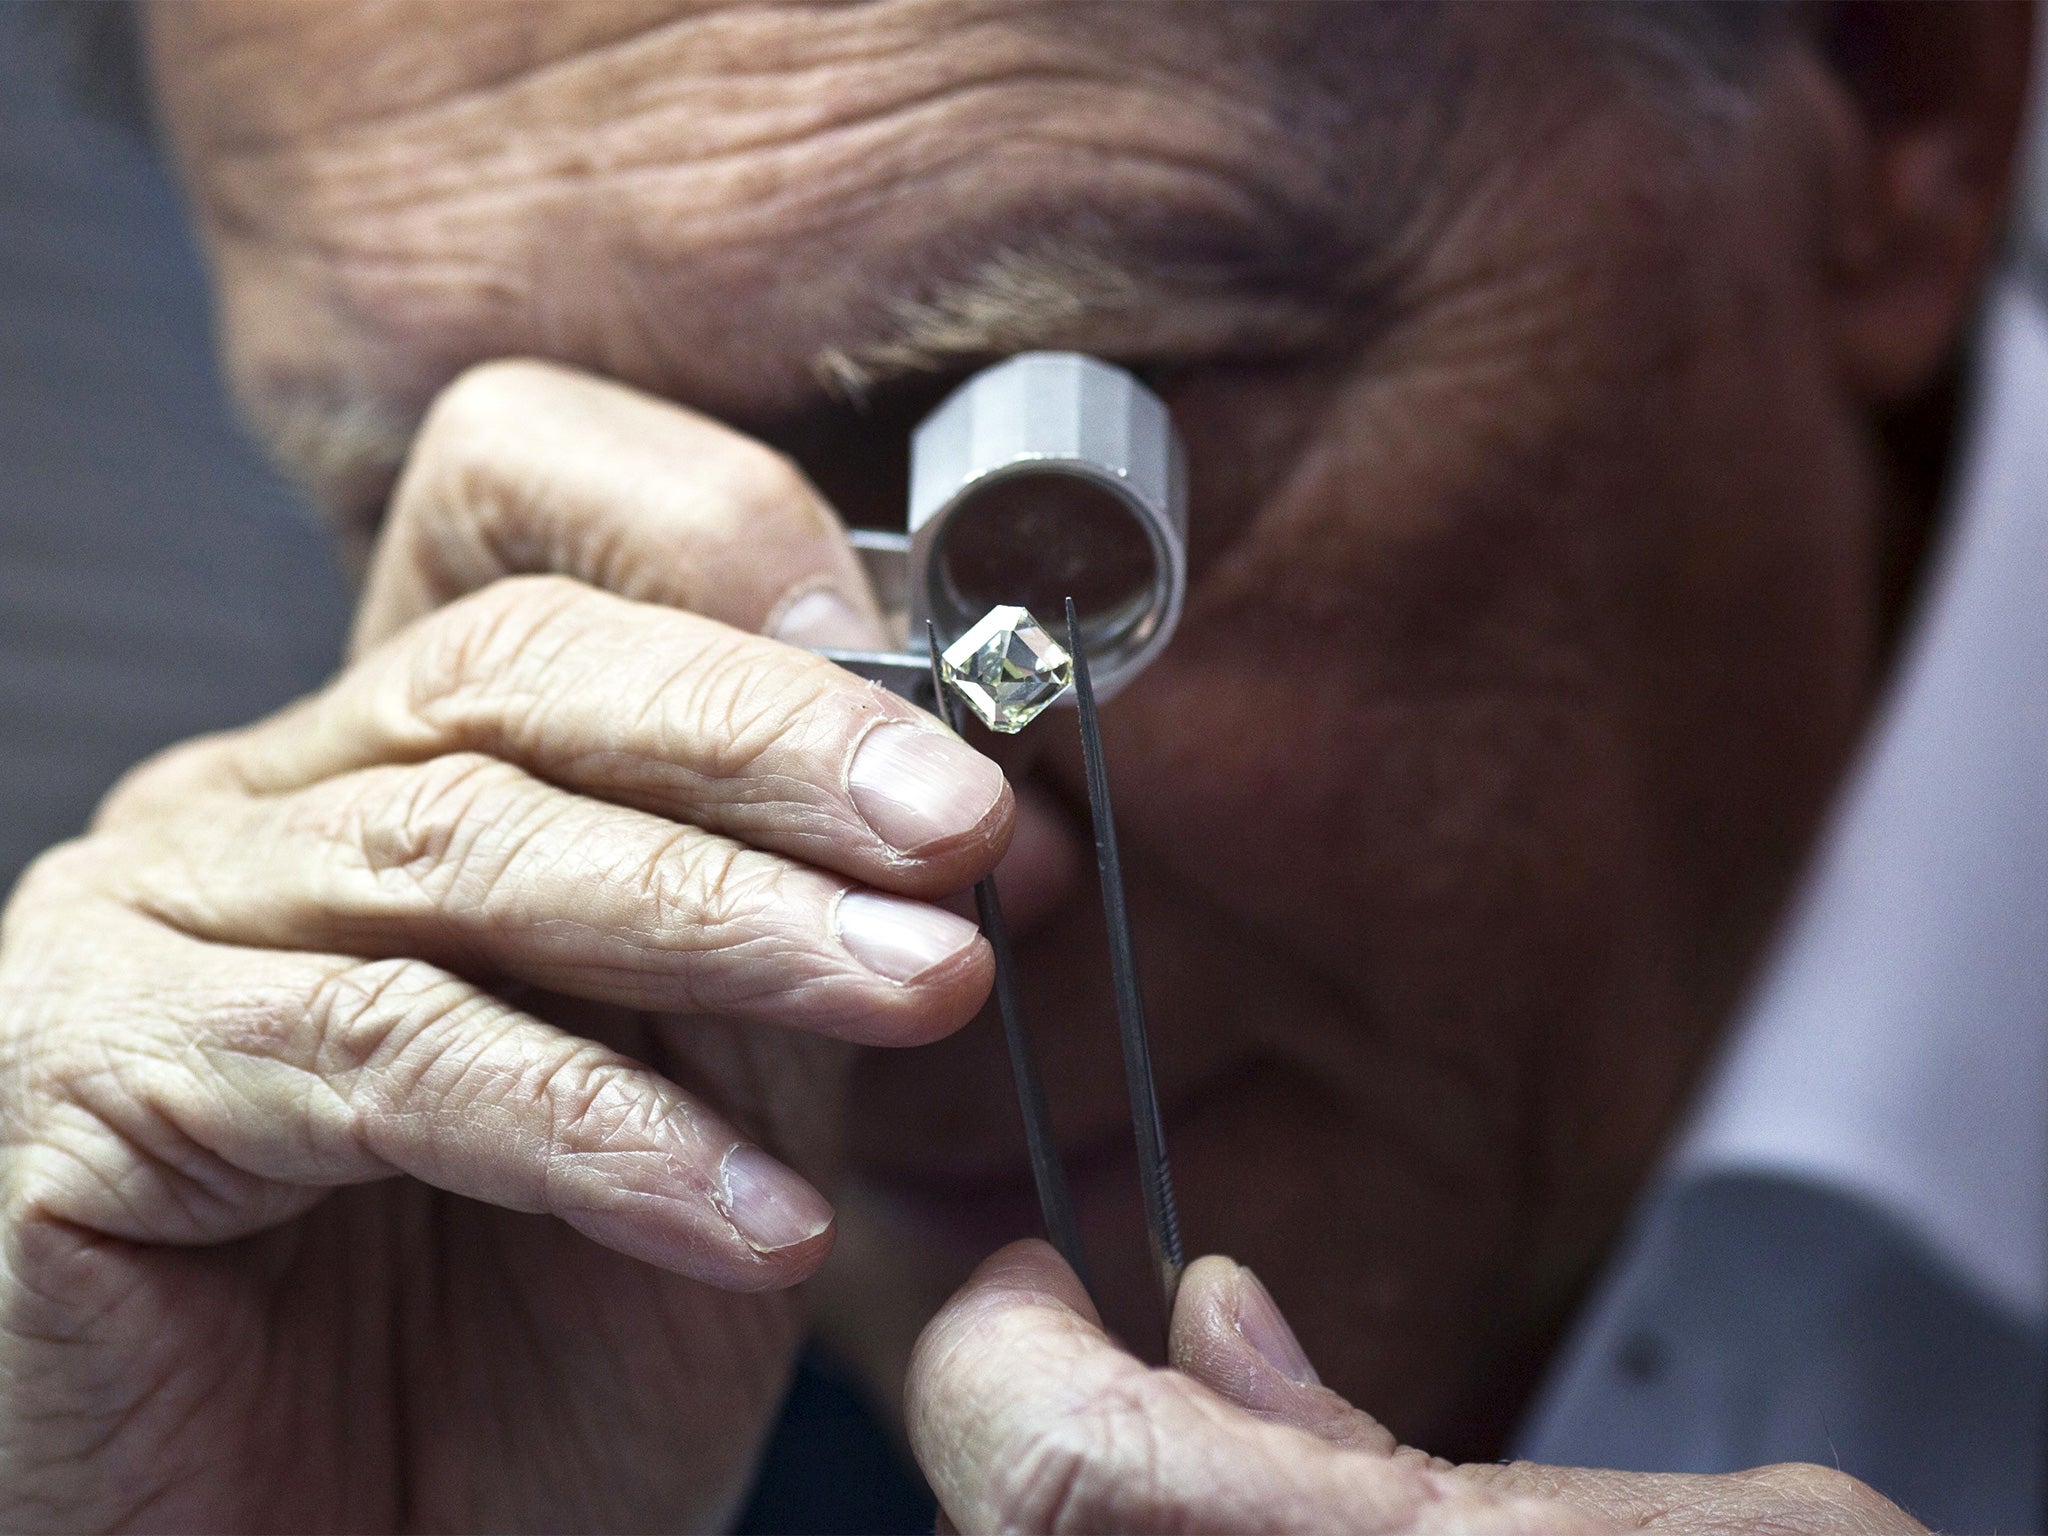 A trader inspects a diamond during a show at the IDE in Ramat Gan near Tel Aviv